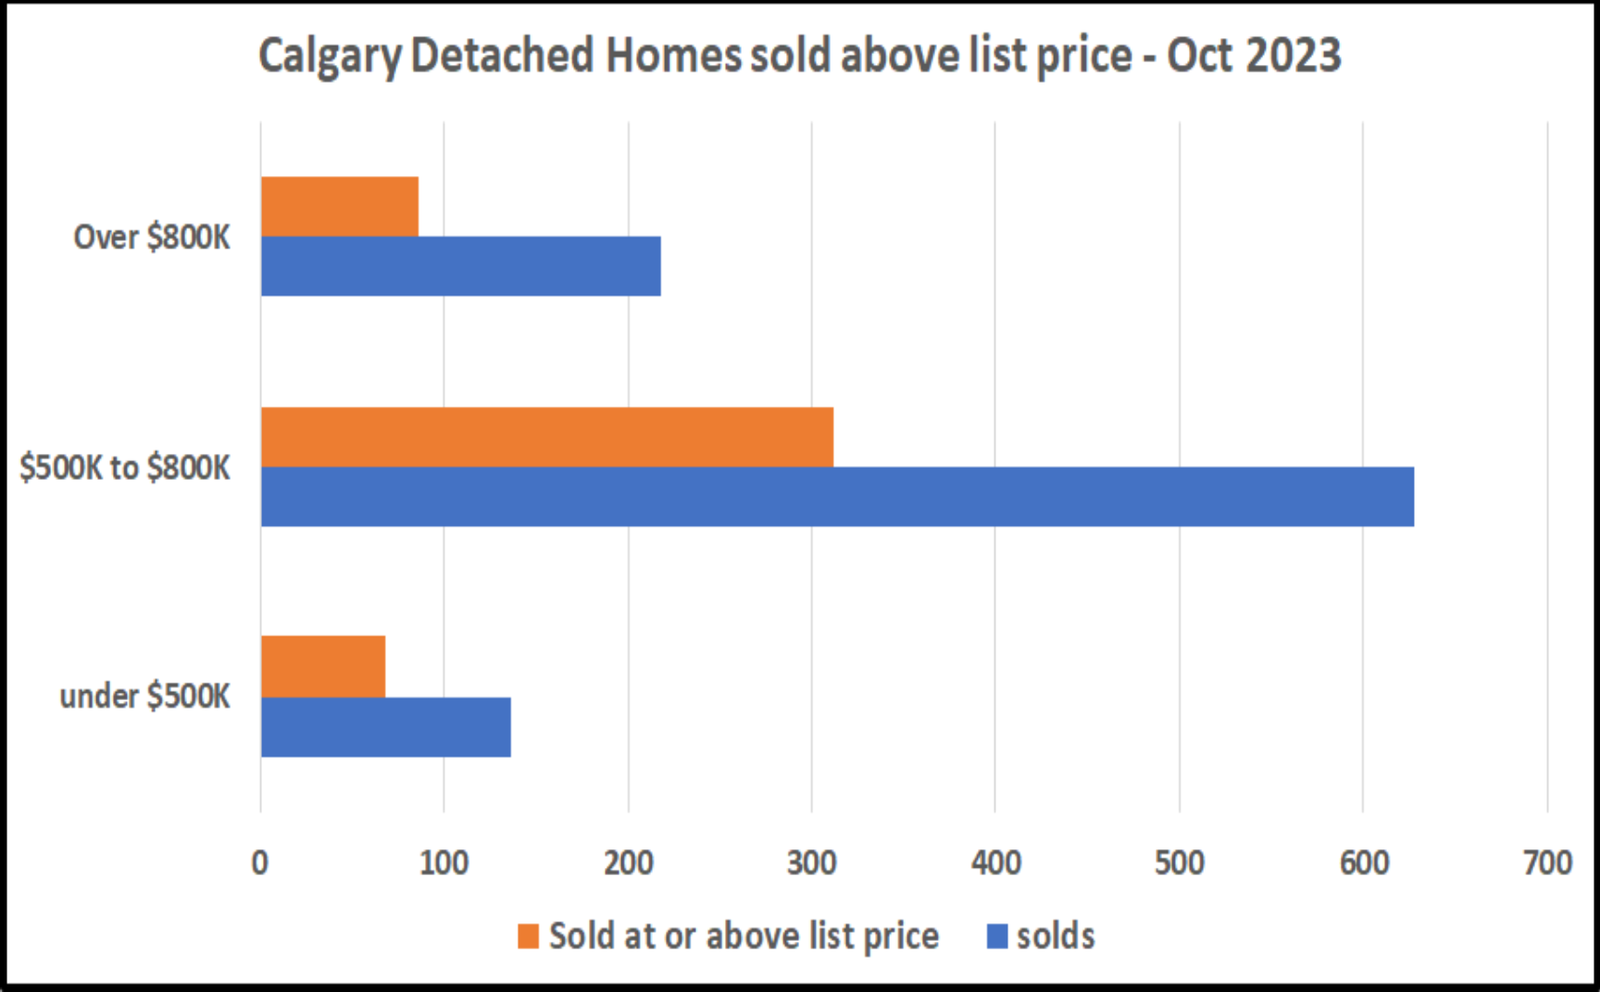 Calagry Detached Homes sold above list price in October 2023